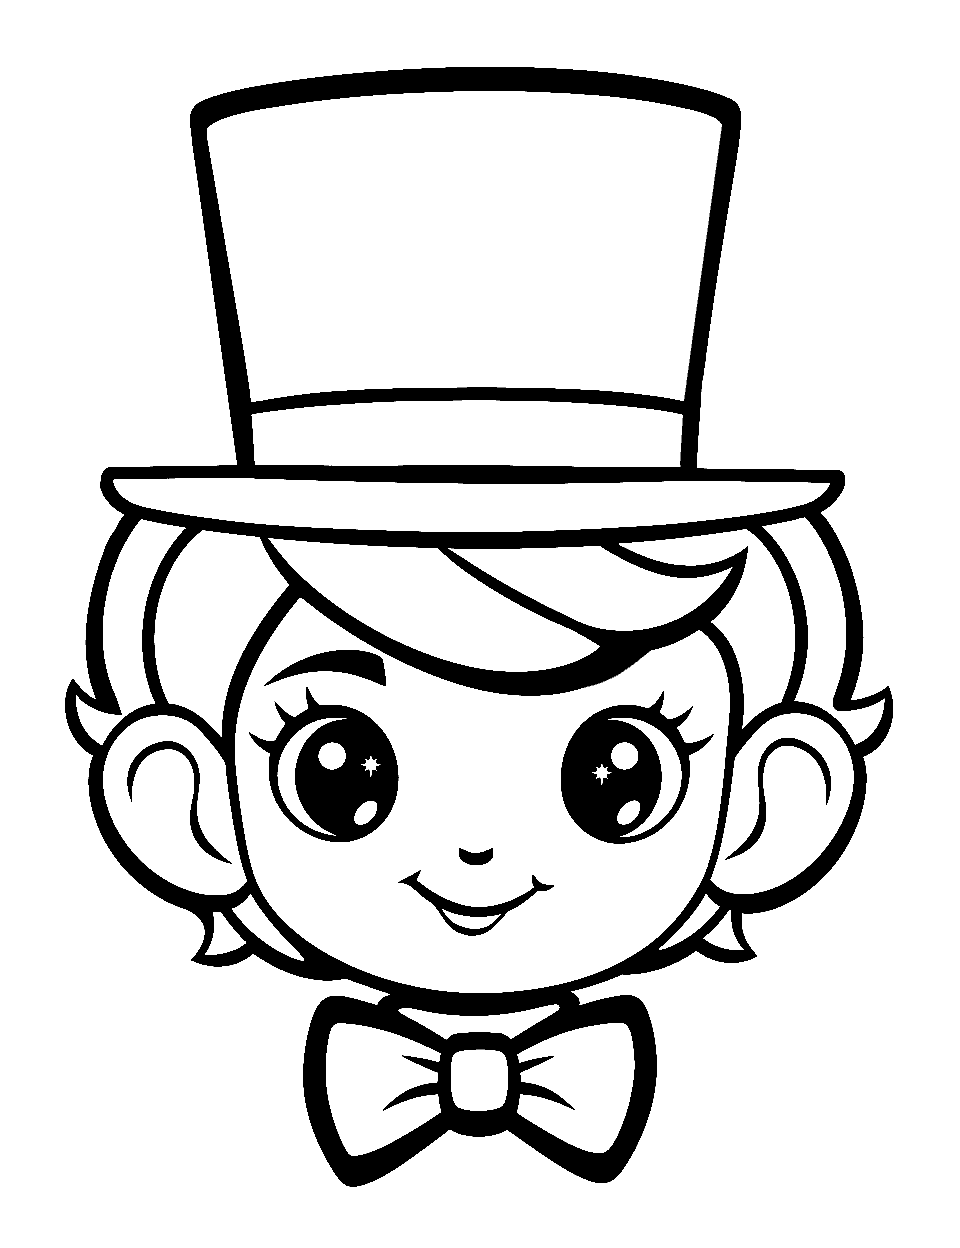 Kawaii Styled Leprechaun Face Coloring Page - A super cute face of a leprechaun with twinkle in his eyes.